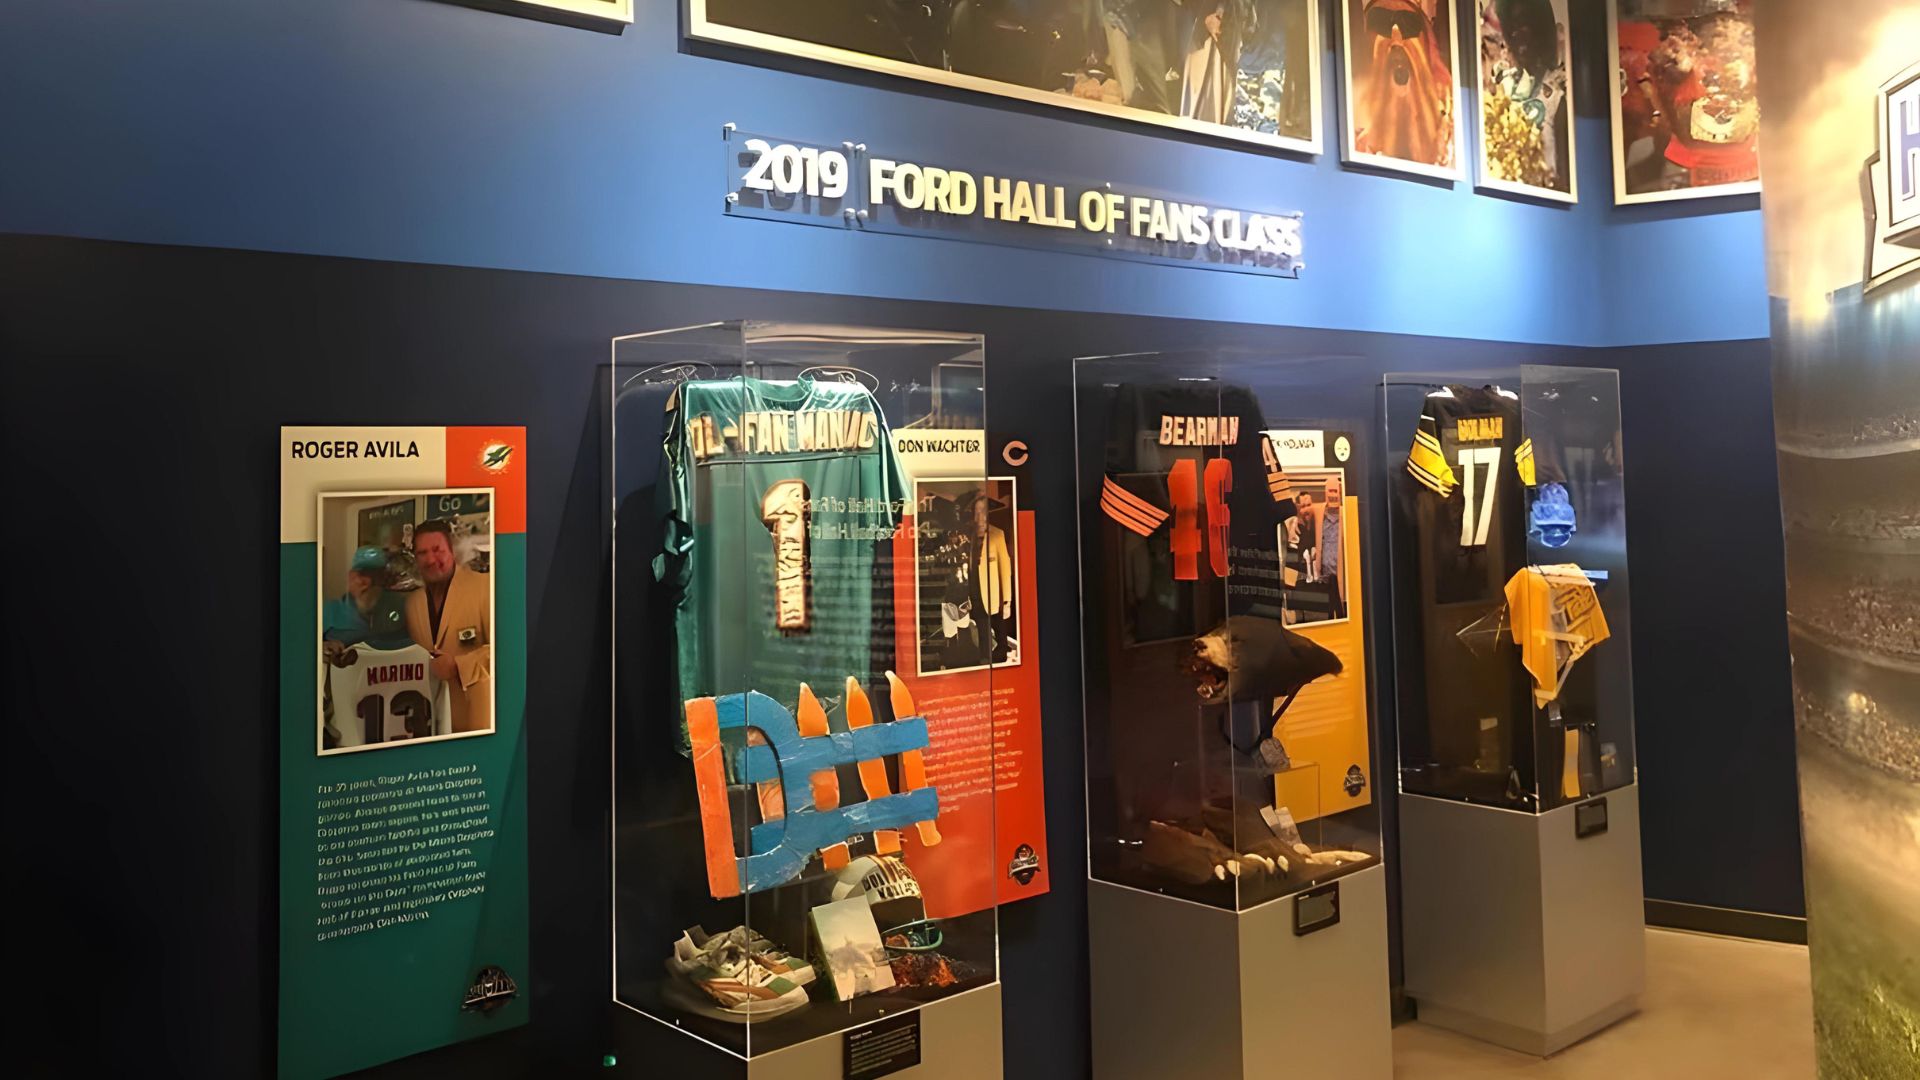 Pro Football Hall of Fame Canton OH Ford Hall of Fans Class of 2019